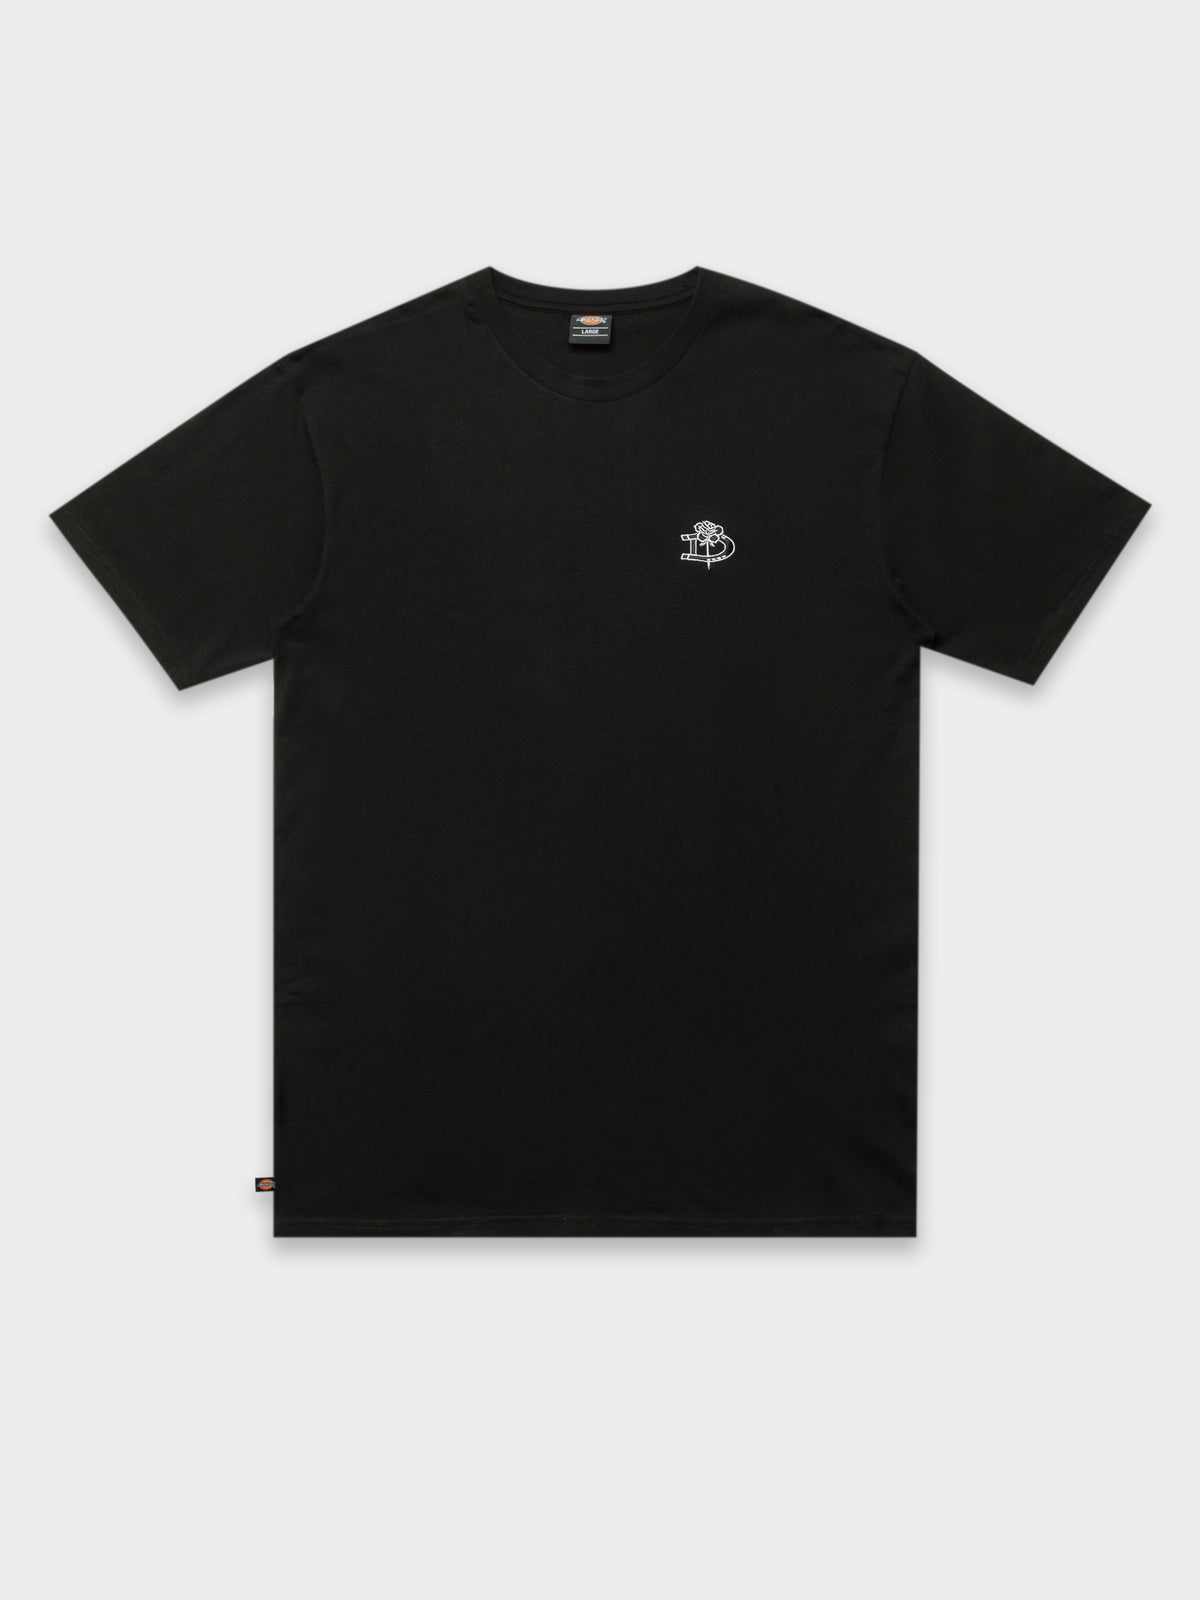 Wired T-Shirt in Black